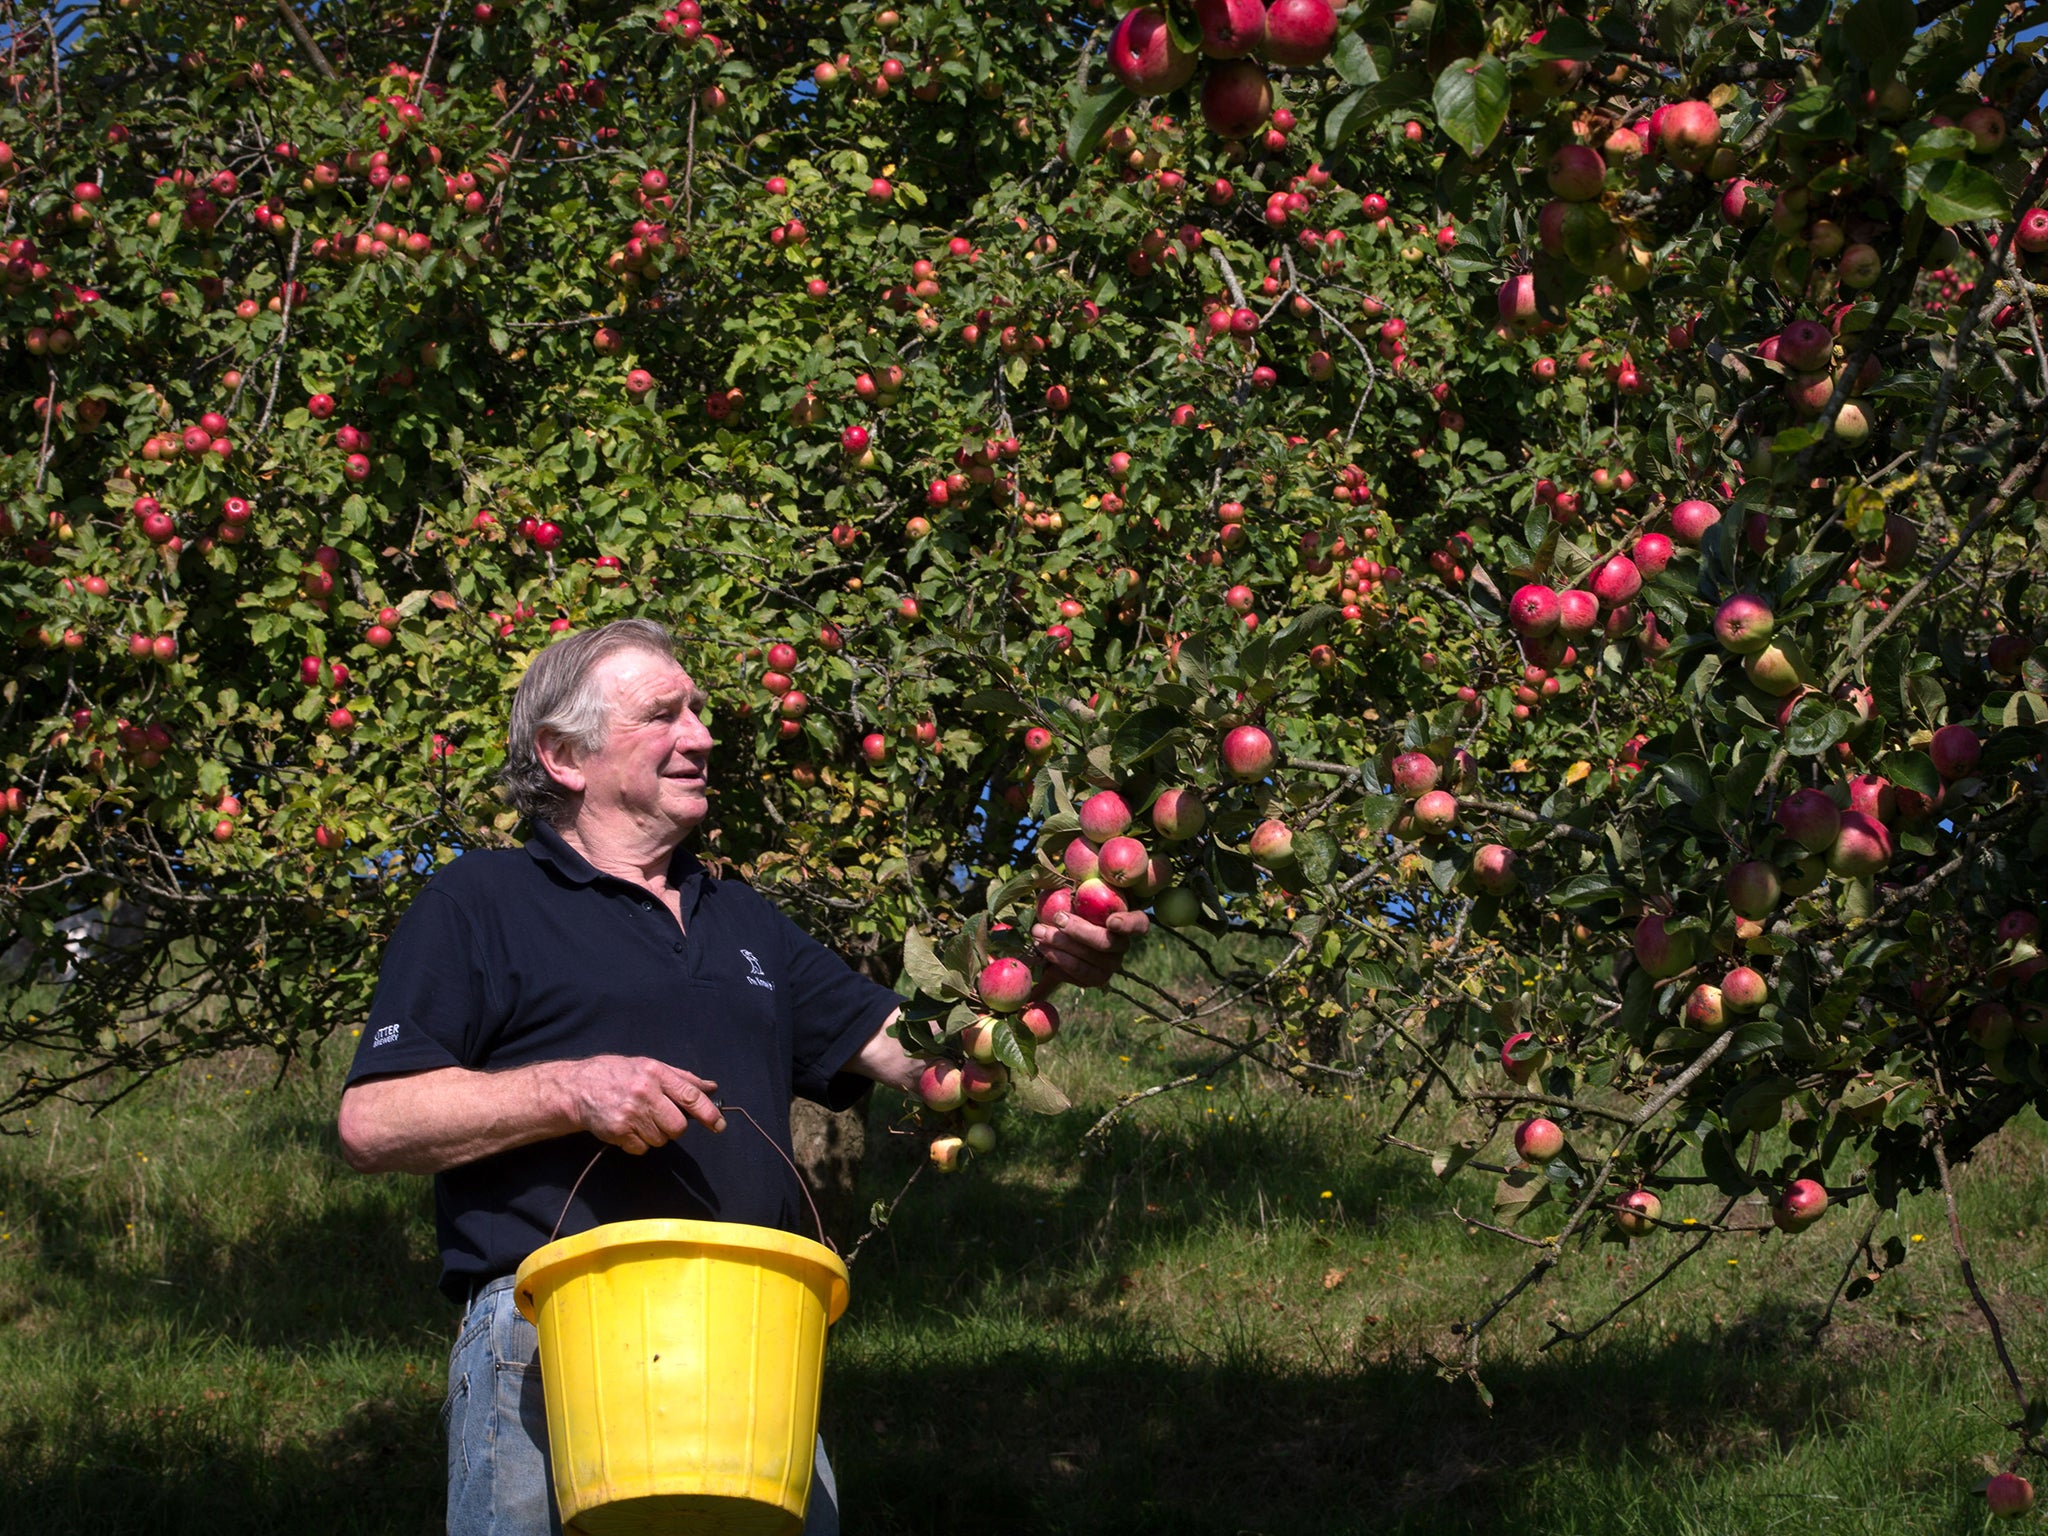 Cider maker Roger Wilkins, owner of Wilkins Cider Farm picks apples from a tree in his orchard at his farm in the village of Mudgley in Somerset